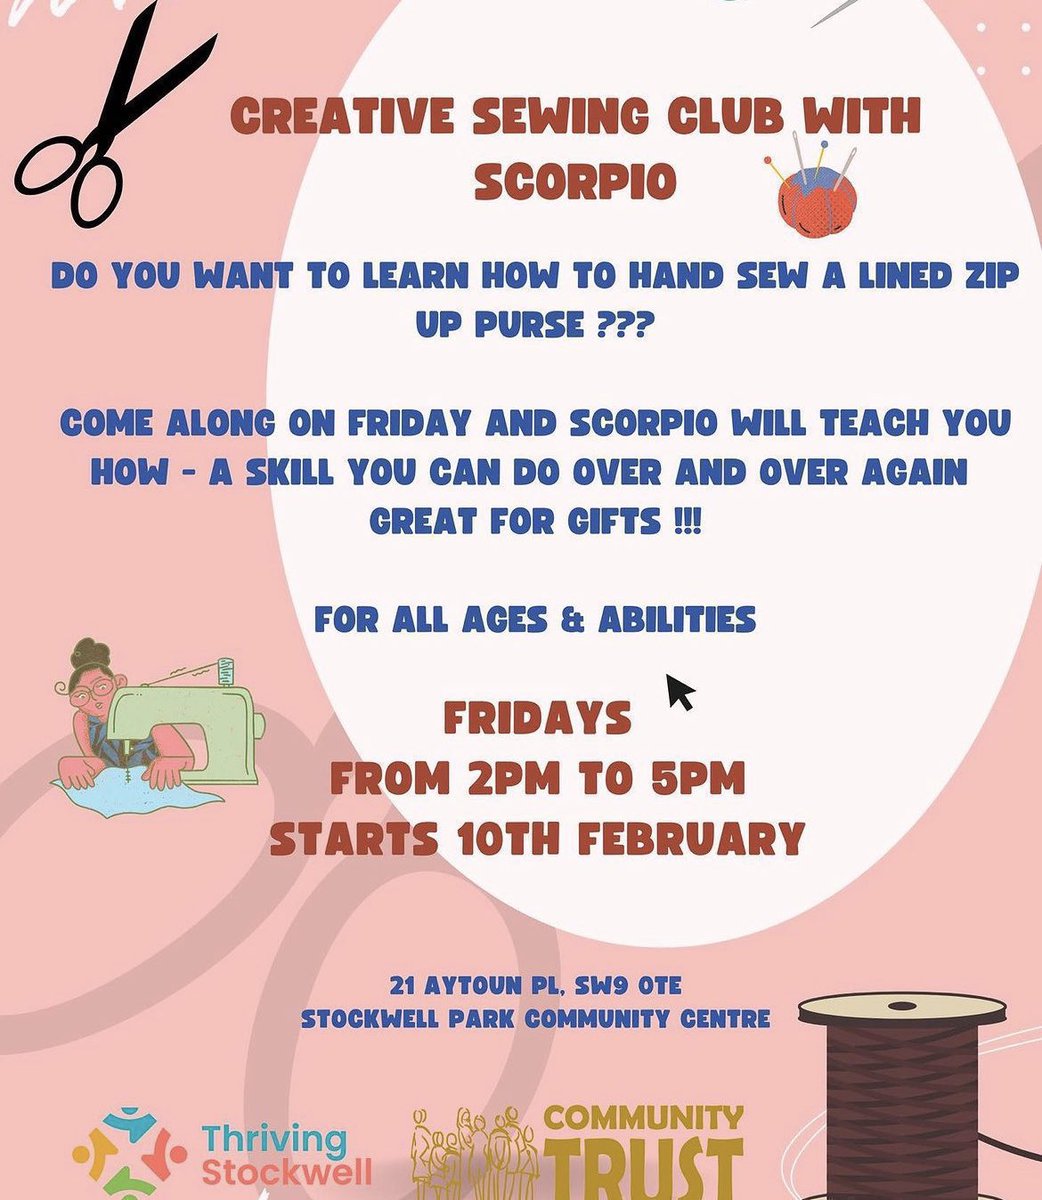 🌟 Reminder: Enjoy FREE wellbeing activities in Stockwell EVERY FRIDAY! Why not join any of the following activities, or all: •Spanish & Portuguese Coffee Morning •Delicious Community Lunch •Gentle Movement, Breath-work, & Yoga •Creative Sewing 💃 Check the flyers